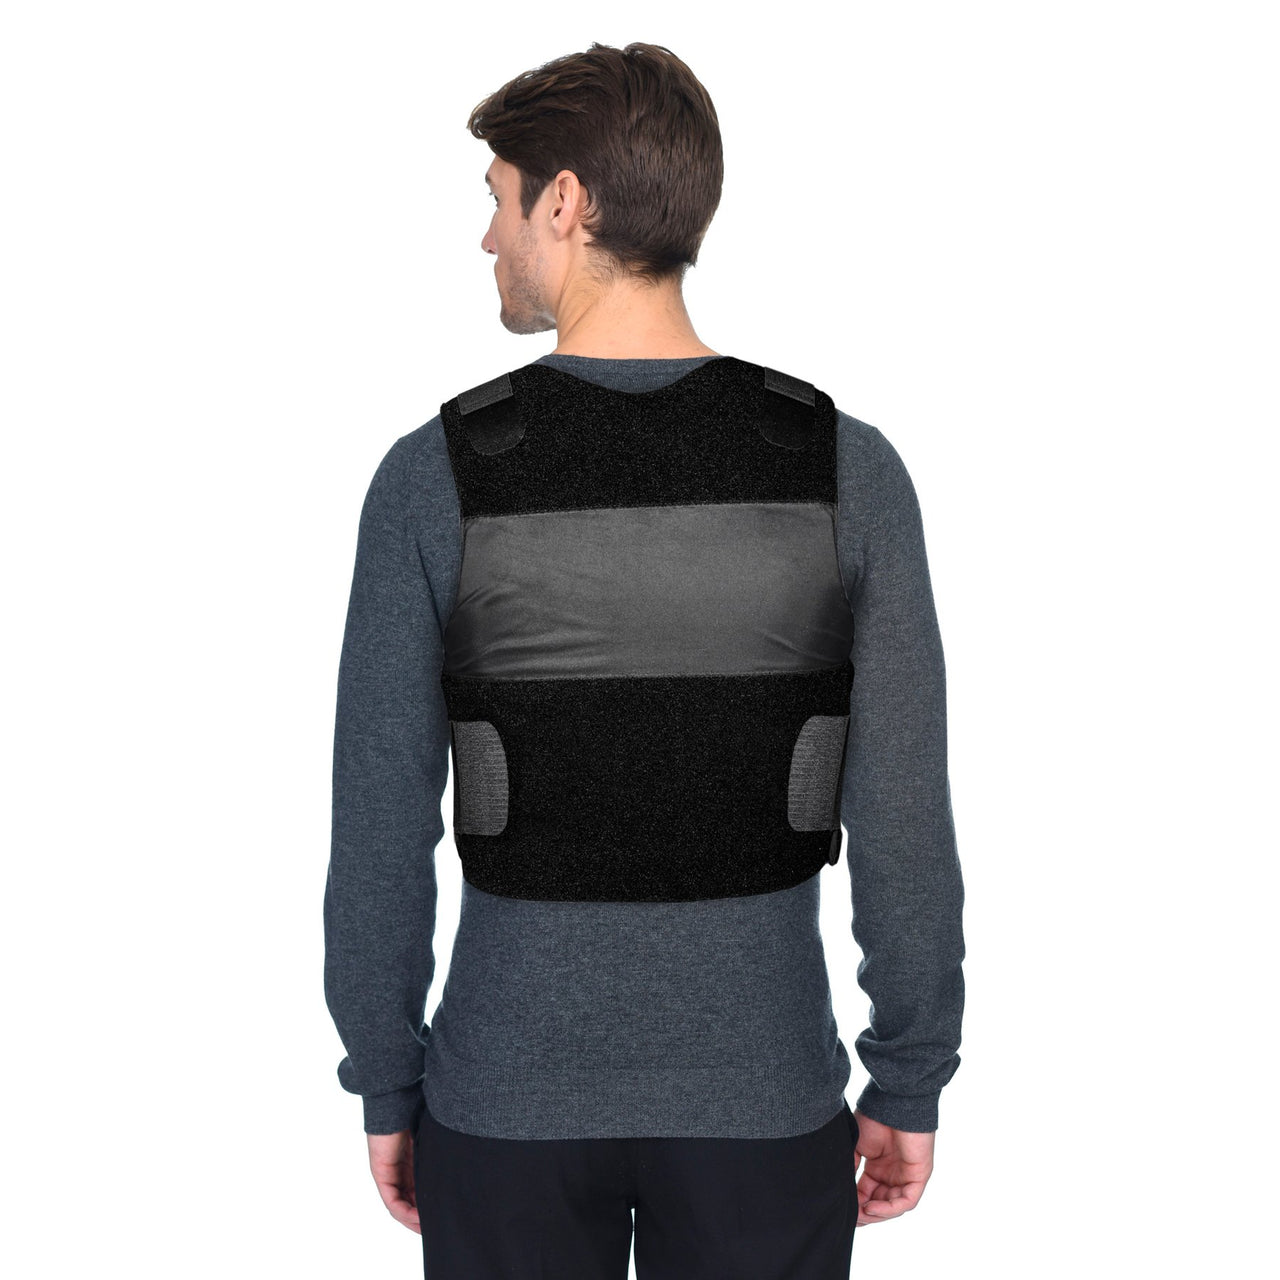 The back of a man wearing a Body Armor Direct Freedom Concealable Carrier vest.